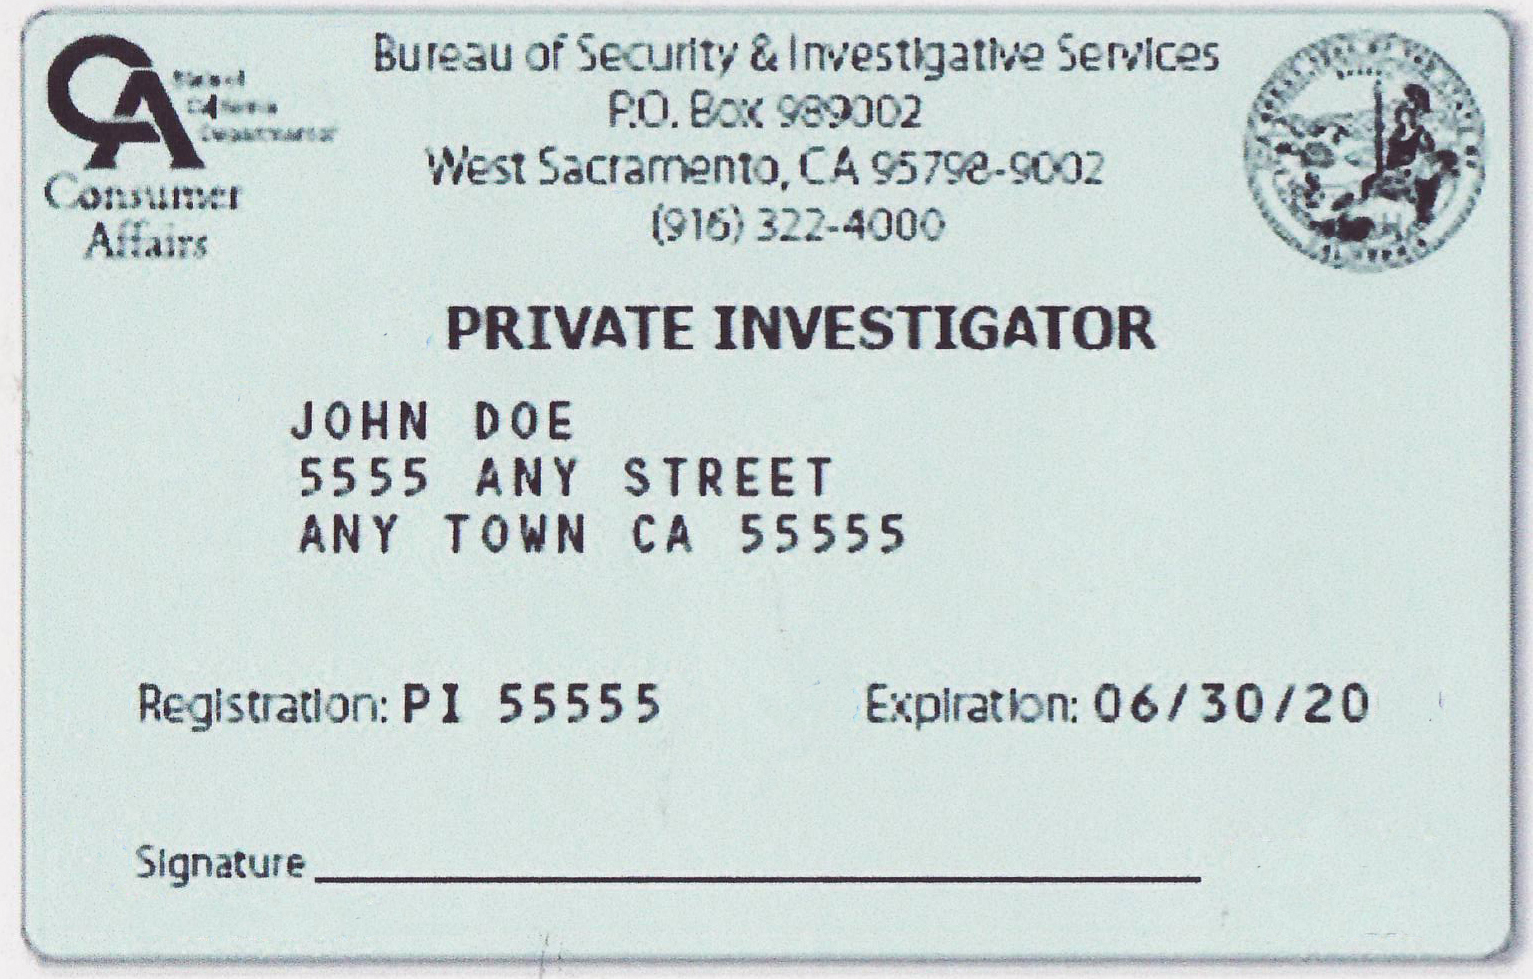 practice test for california private investigator license at www.thePIgroup.com